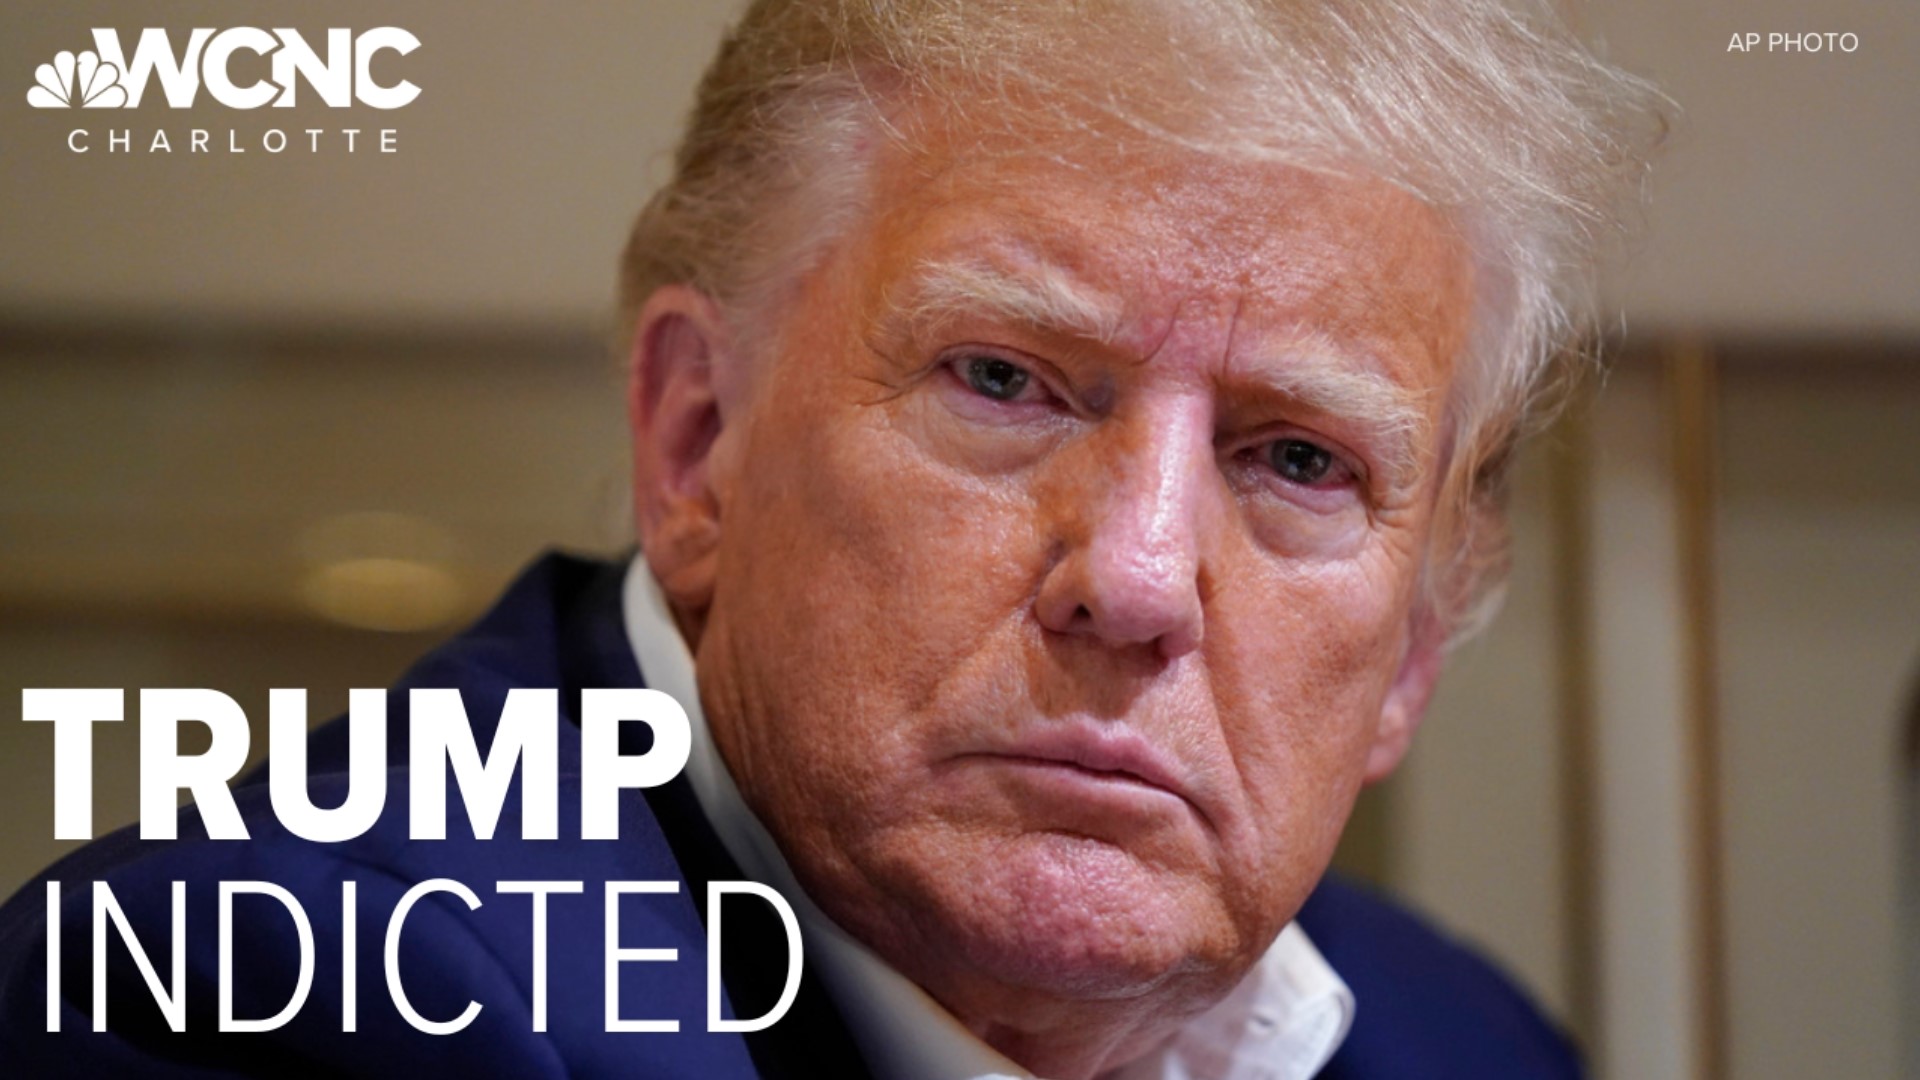 Former President Donald Trump says he's been indicted.